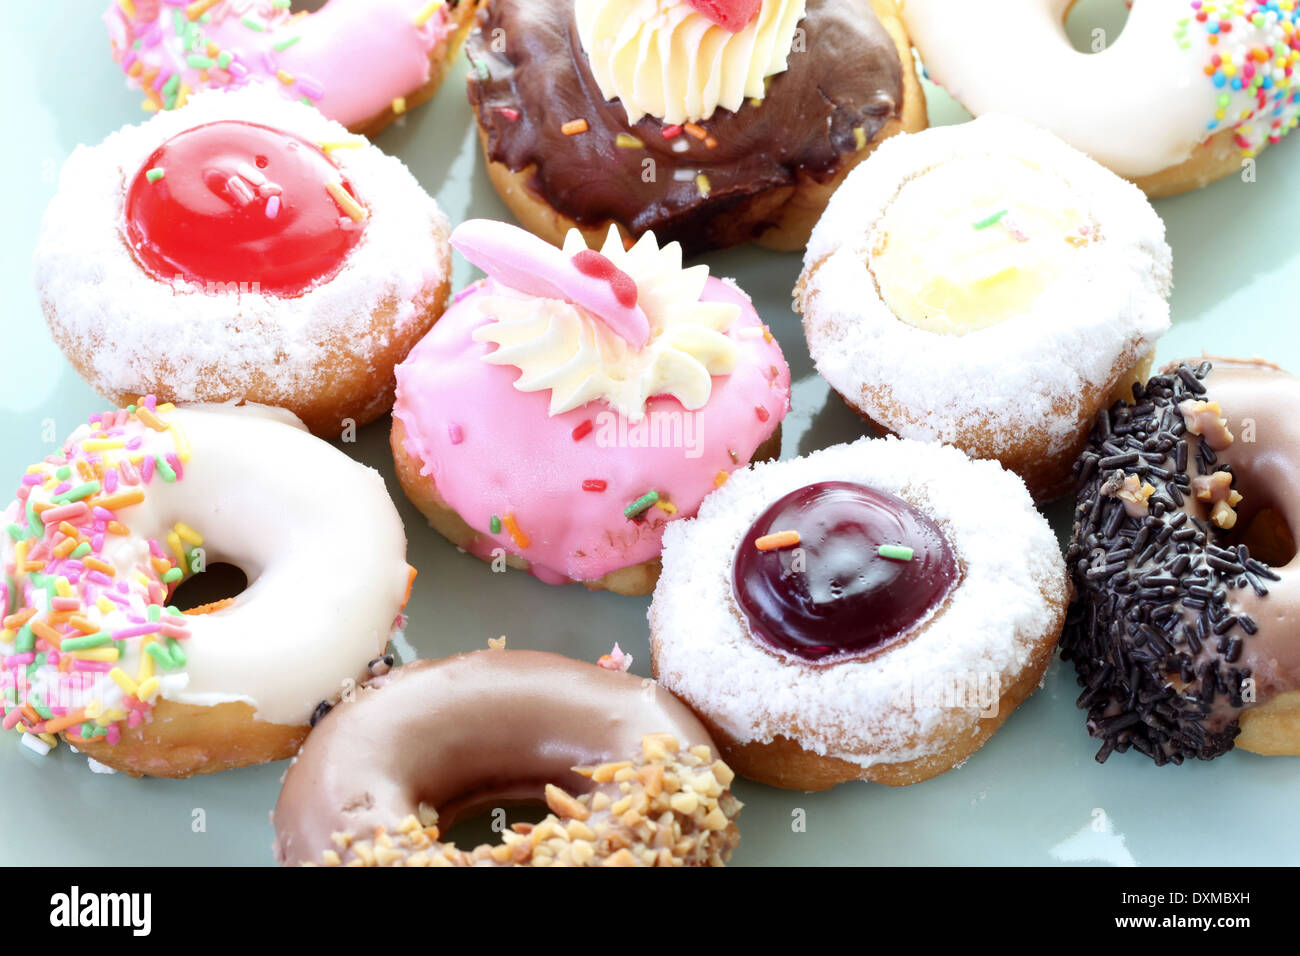 Many donuts in the dish with side by side. Stock Photo